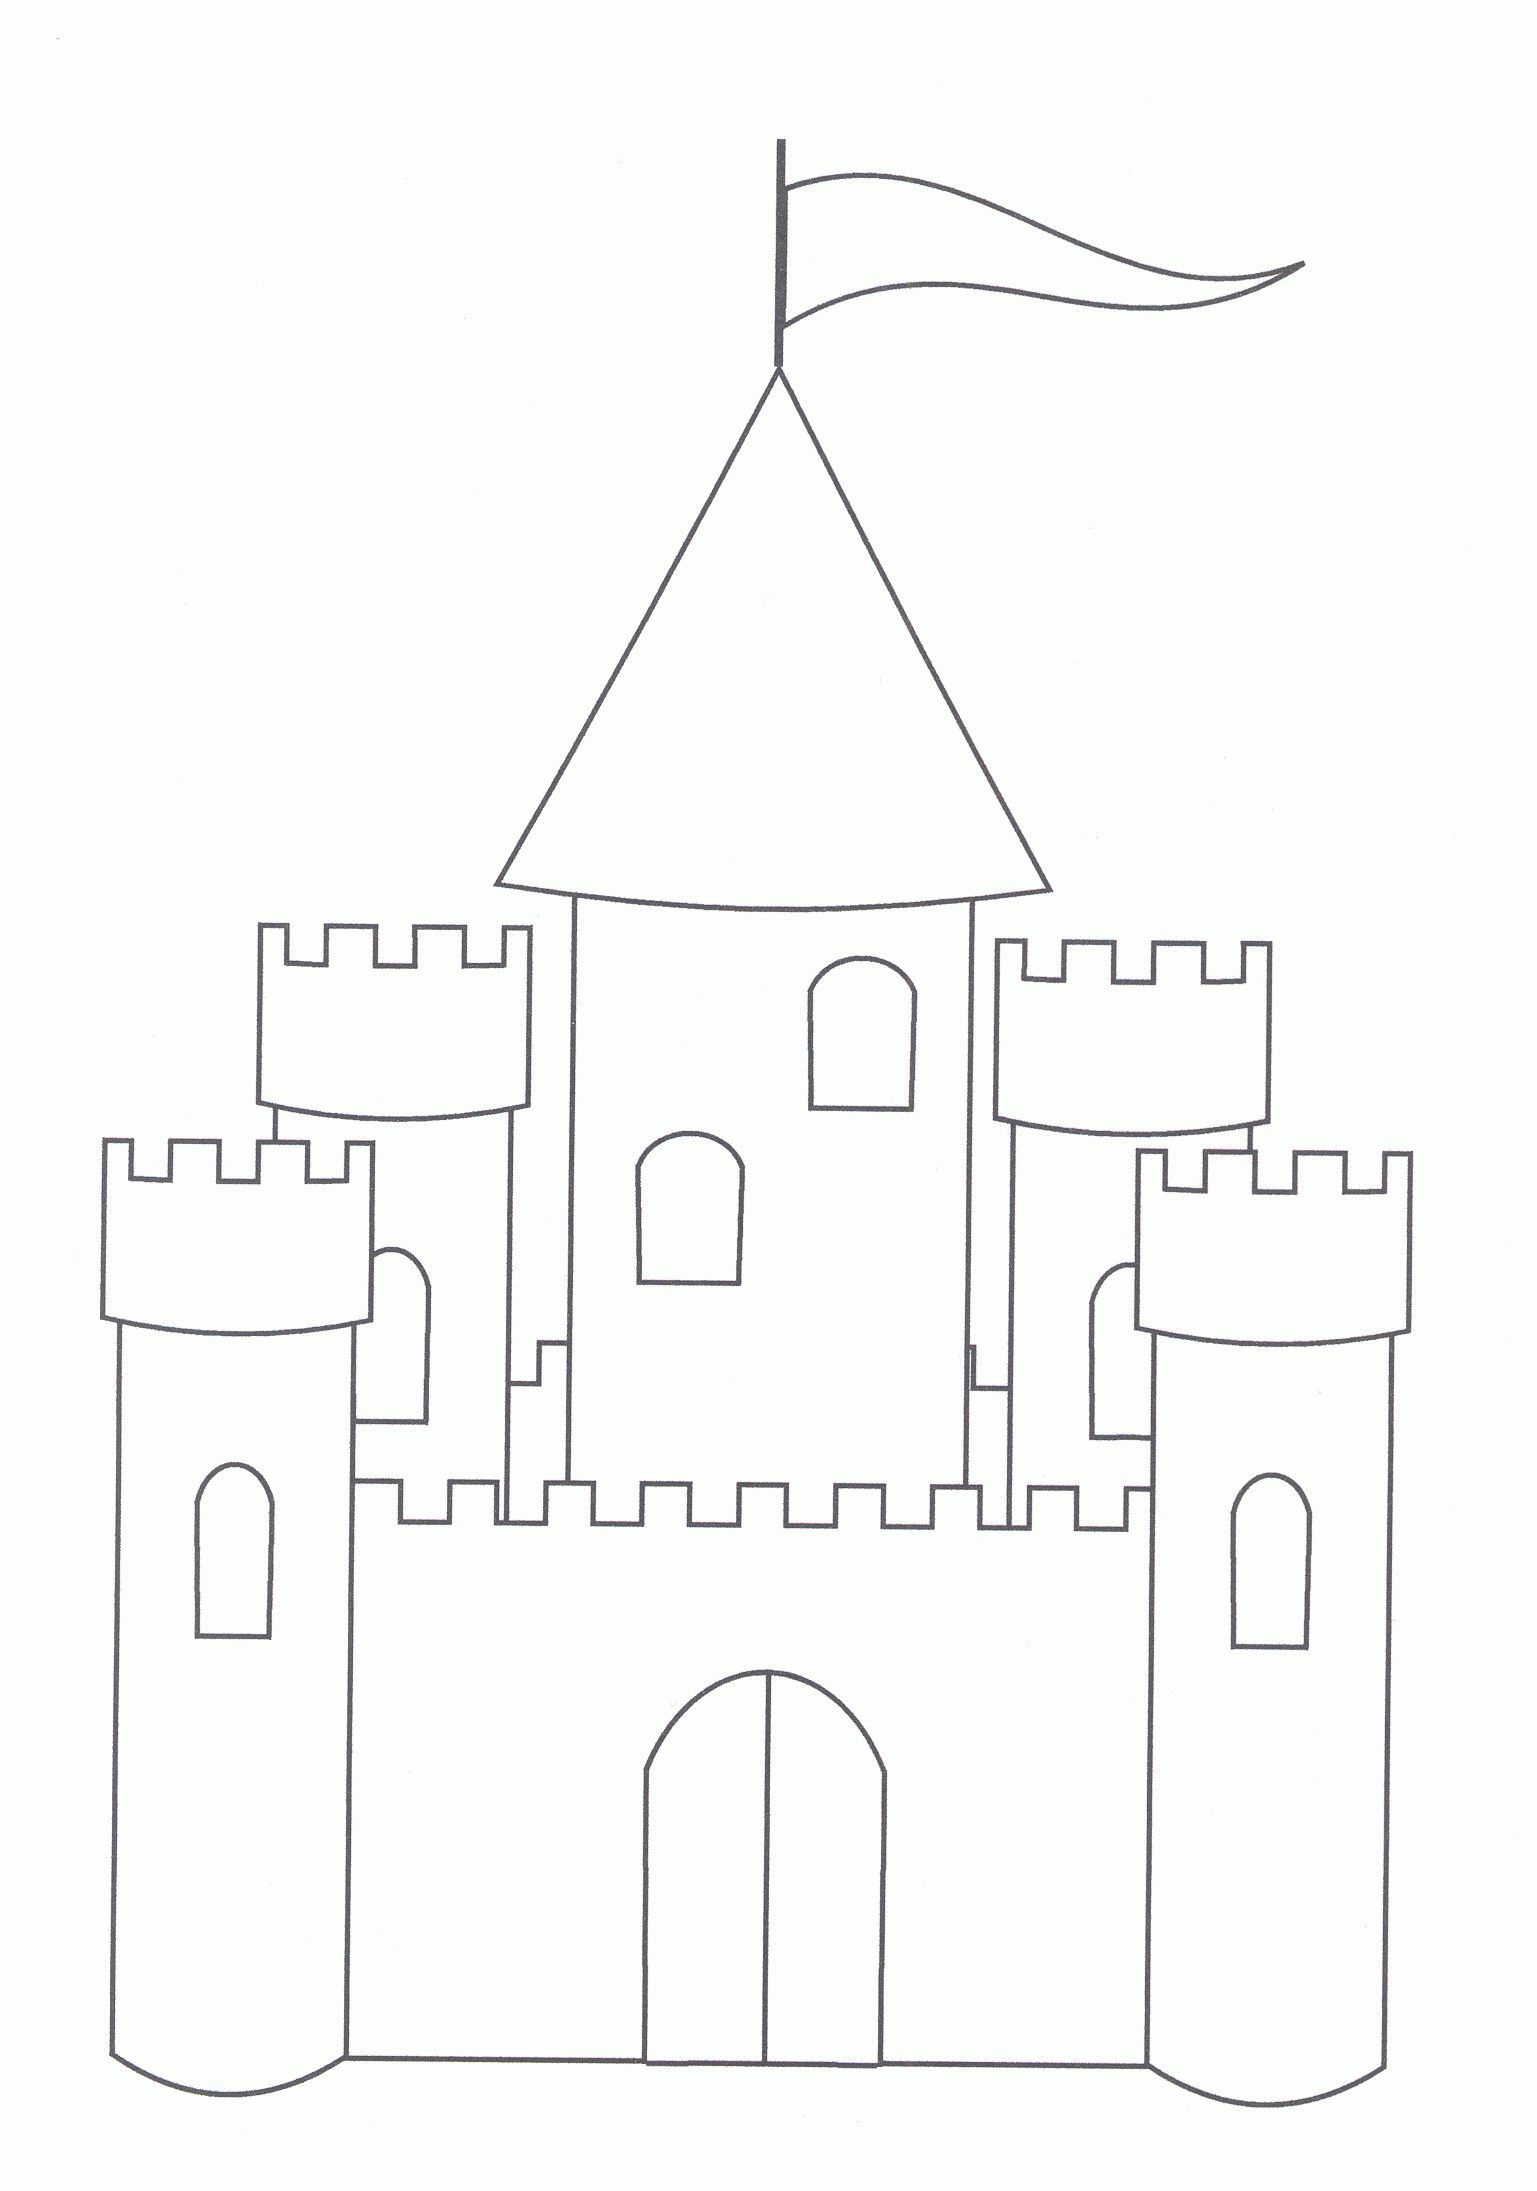 Free Printable Castle Coloring Pages For Kids | Templates - Free Printable Castle Templates